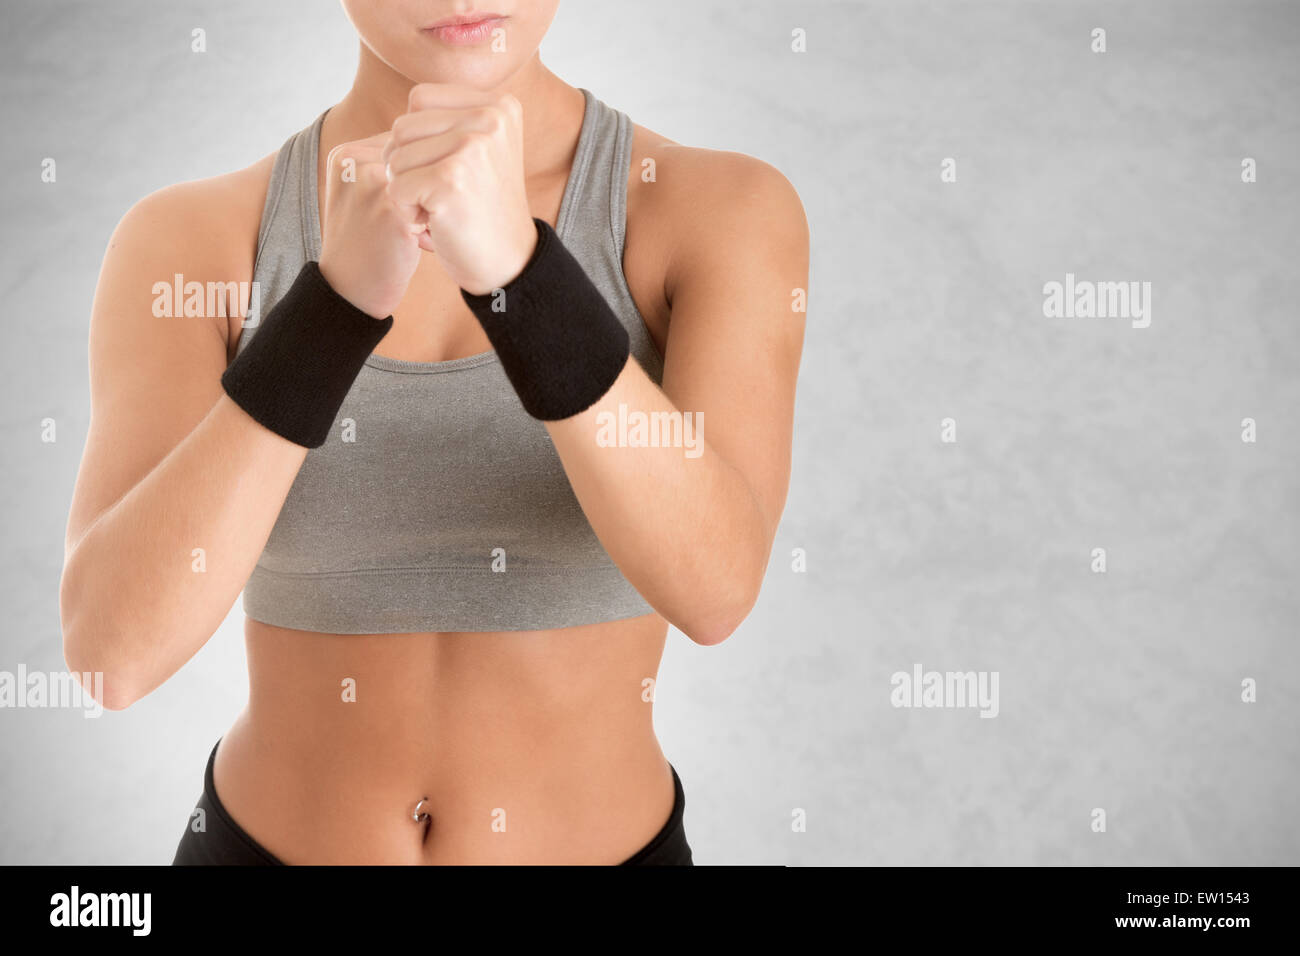 Female Boxer Ready to Fight isolated in grey Stock Photo